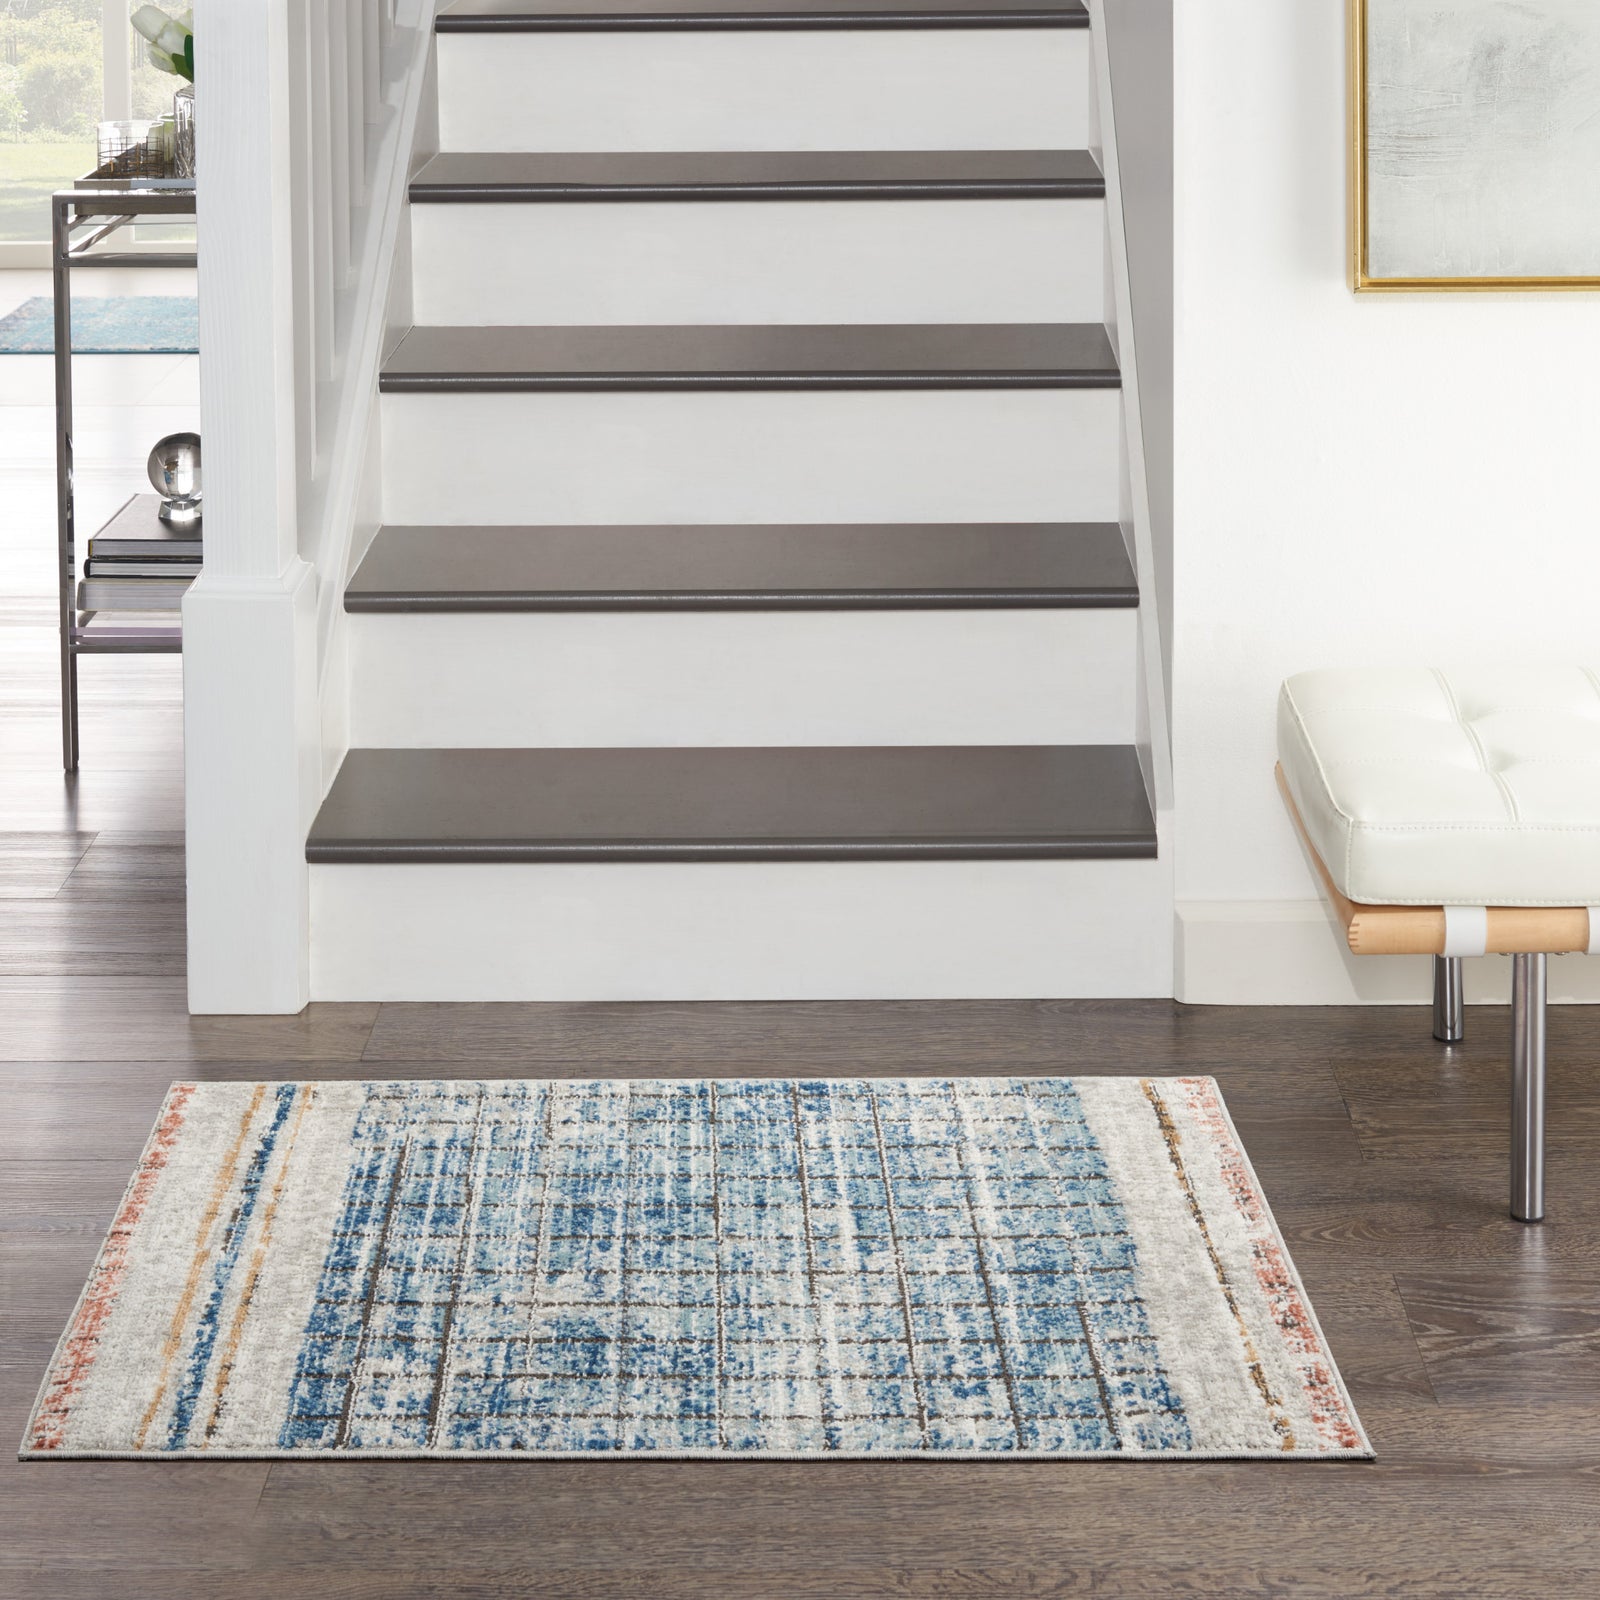 2' X 4' Blue Abstract Power Loom Distressed Non Skid Area Rug